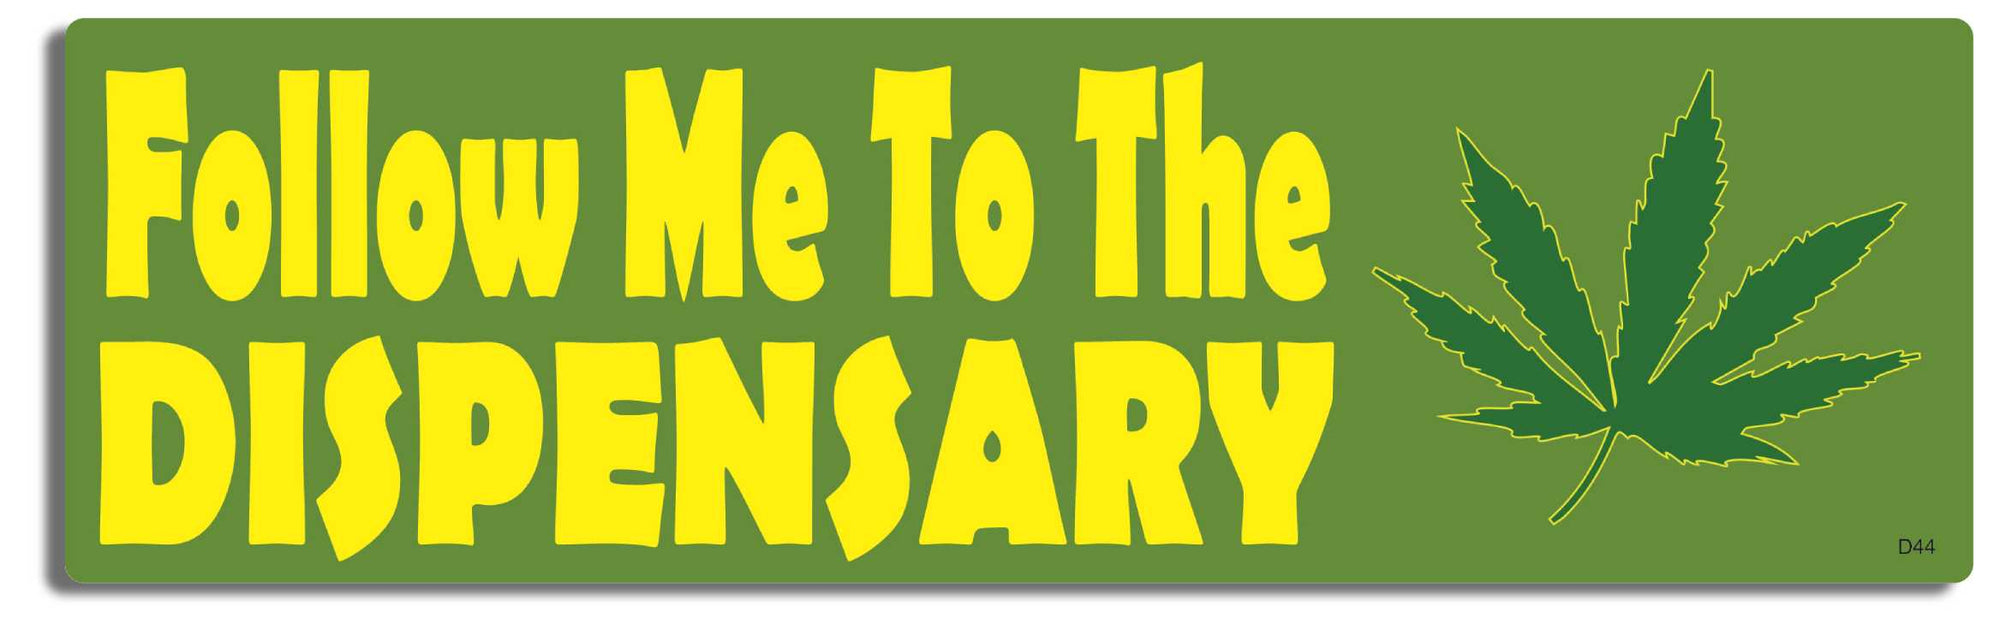 Follow Me To The Dispensary -  3" x 10" - Bumper Sticker--Car Magnet- -  Decal Bumper Sticker-funny Bumper Sticker Car Magnet Follow Me To The Dispensary-   Decal for carsDriving, Funny, Pot, tailgaters, tailgating, weed